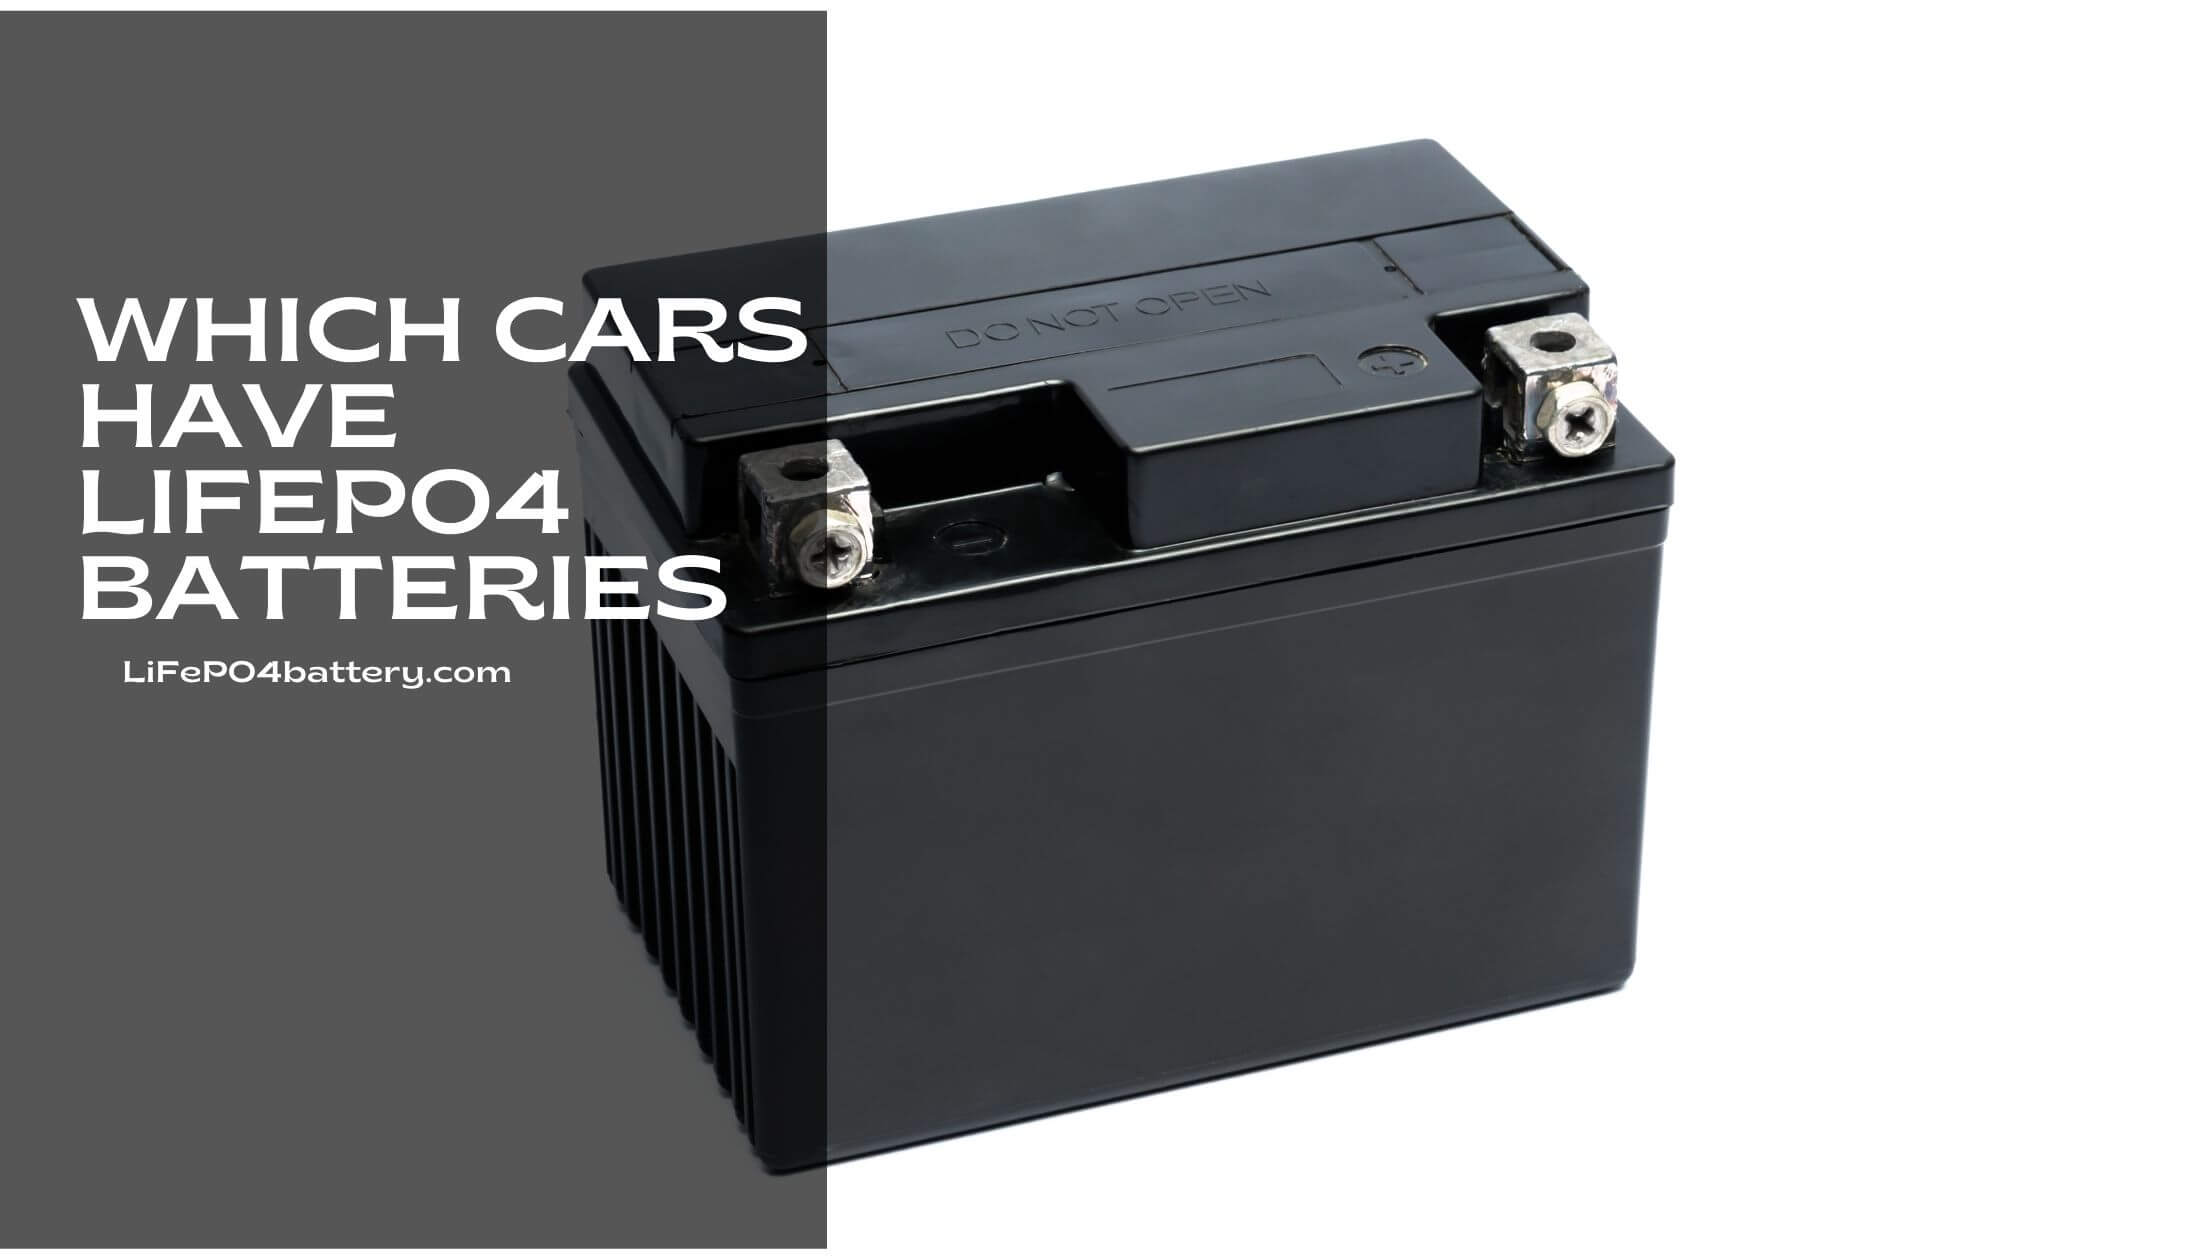 Which cars have lifepo4 batteries (1)